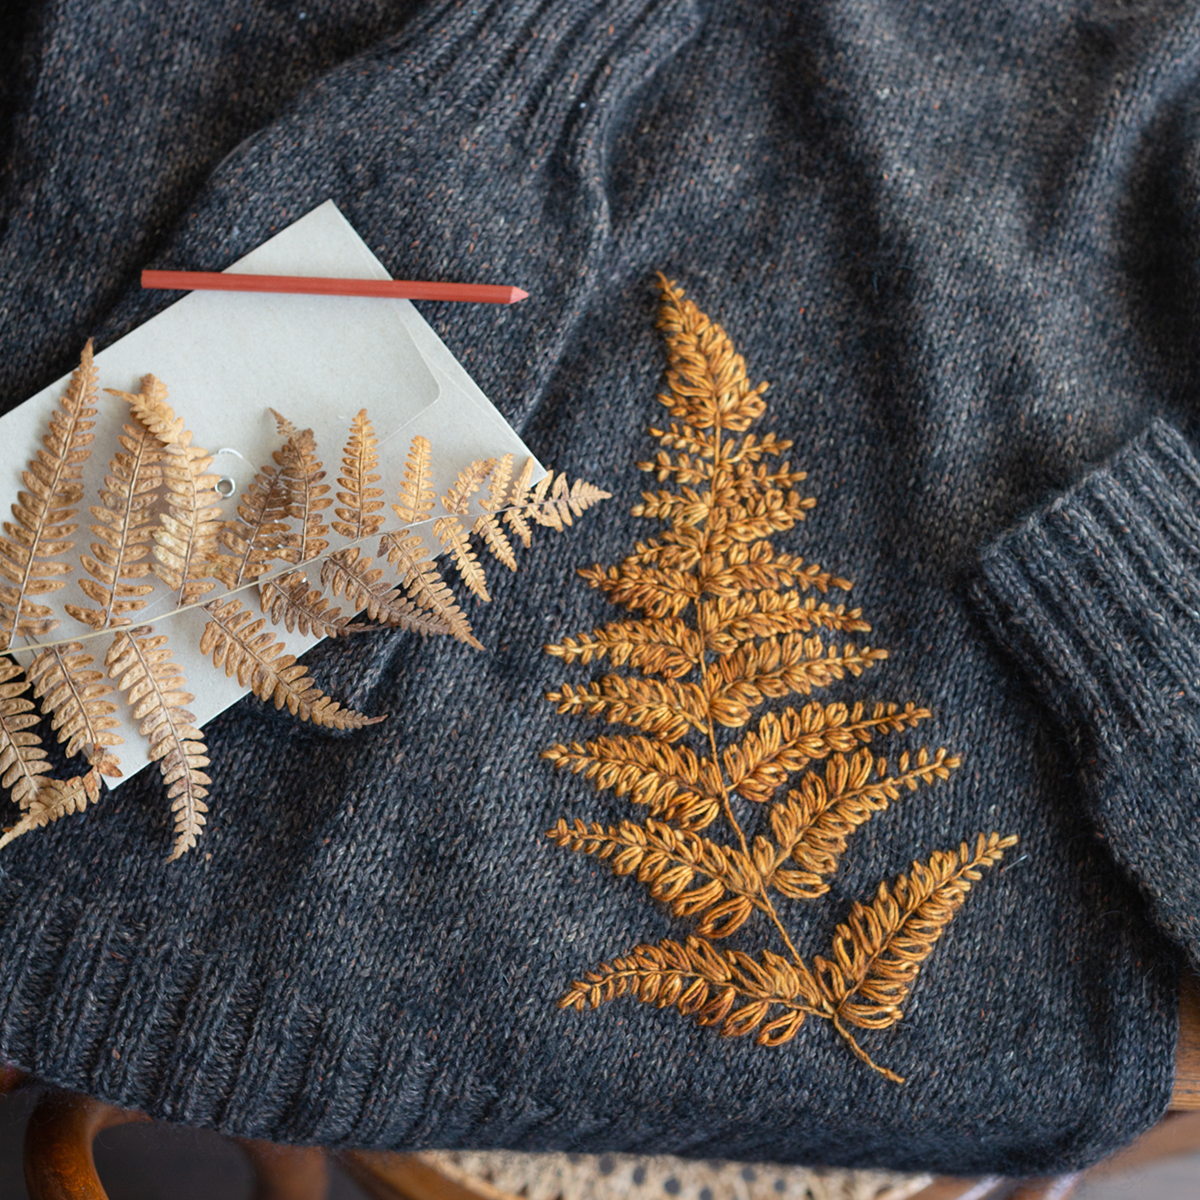 EMBROIDERY ON KNITS by JUDIT GUMMLICH